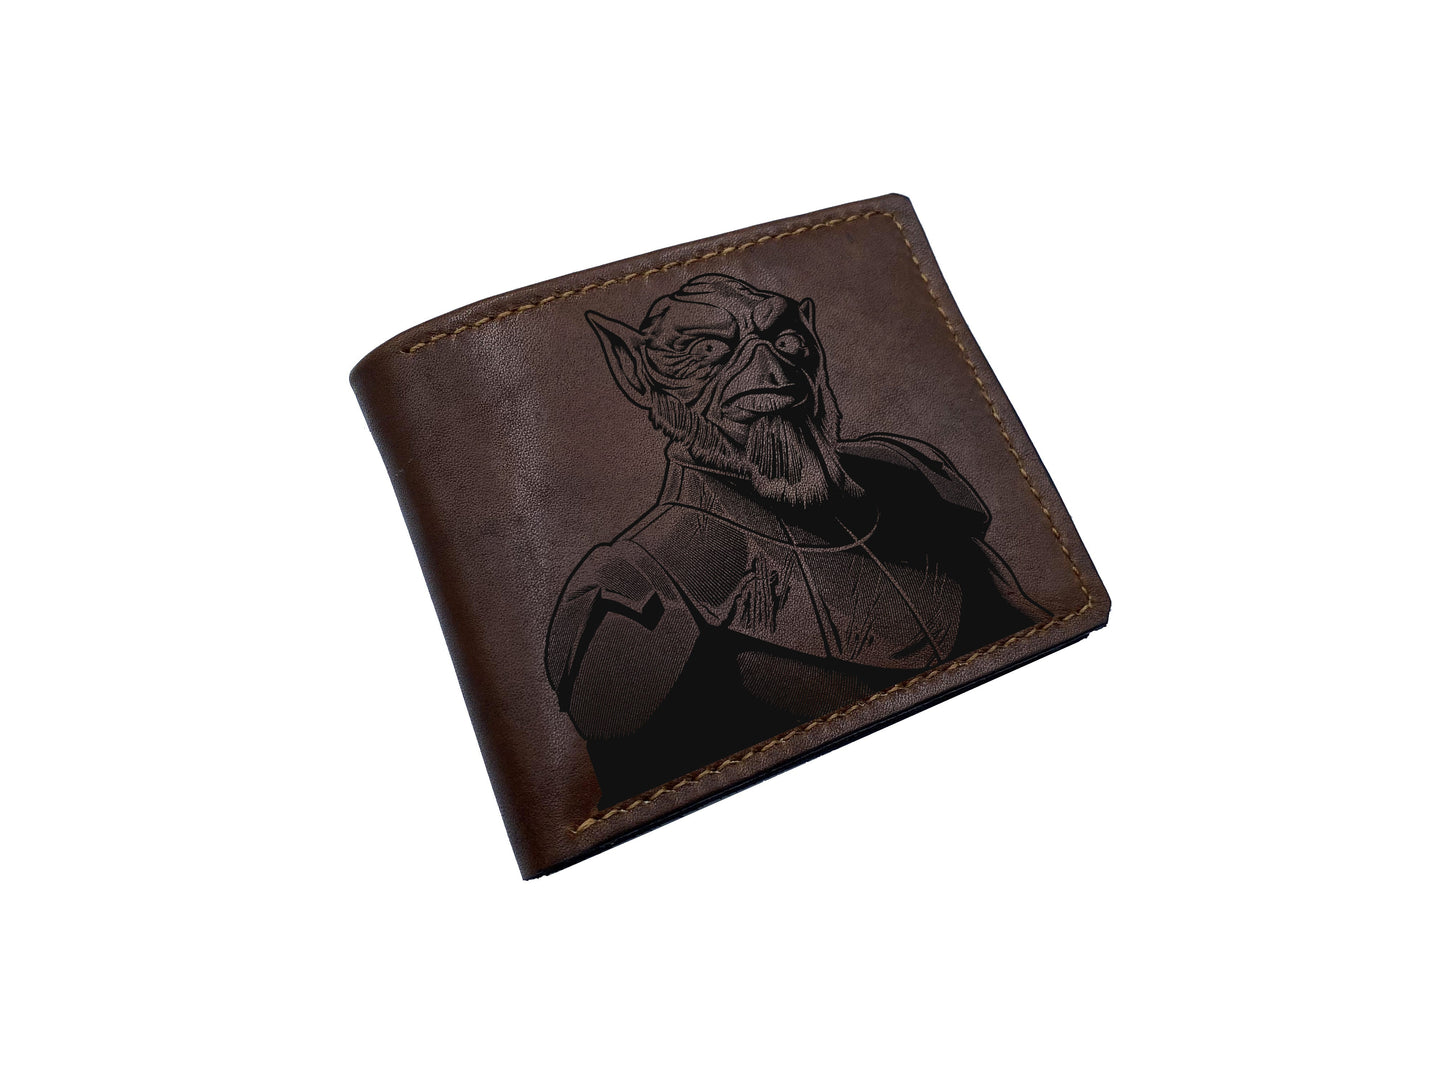 Starwars characters engraving leather wallet, graduation gift for borther, cool wedding gift ideas for friend, wallet for him